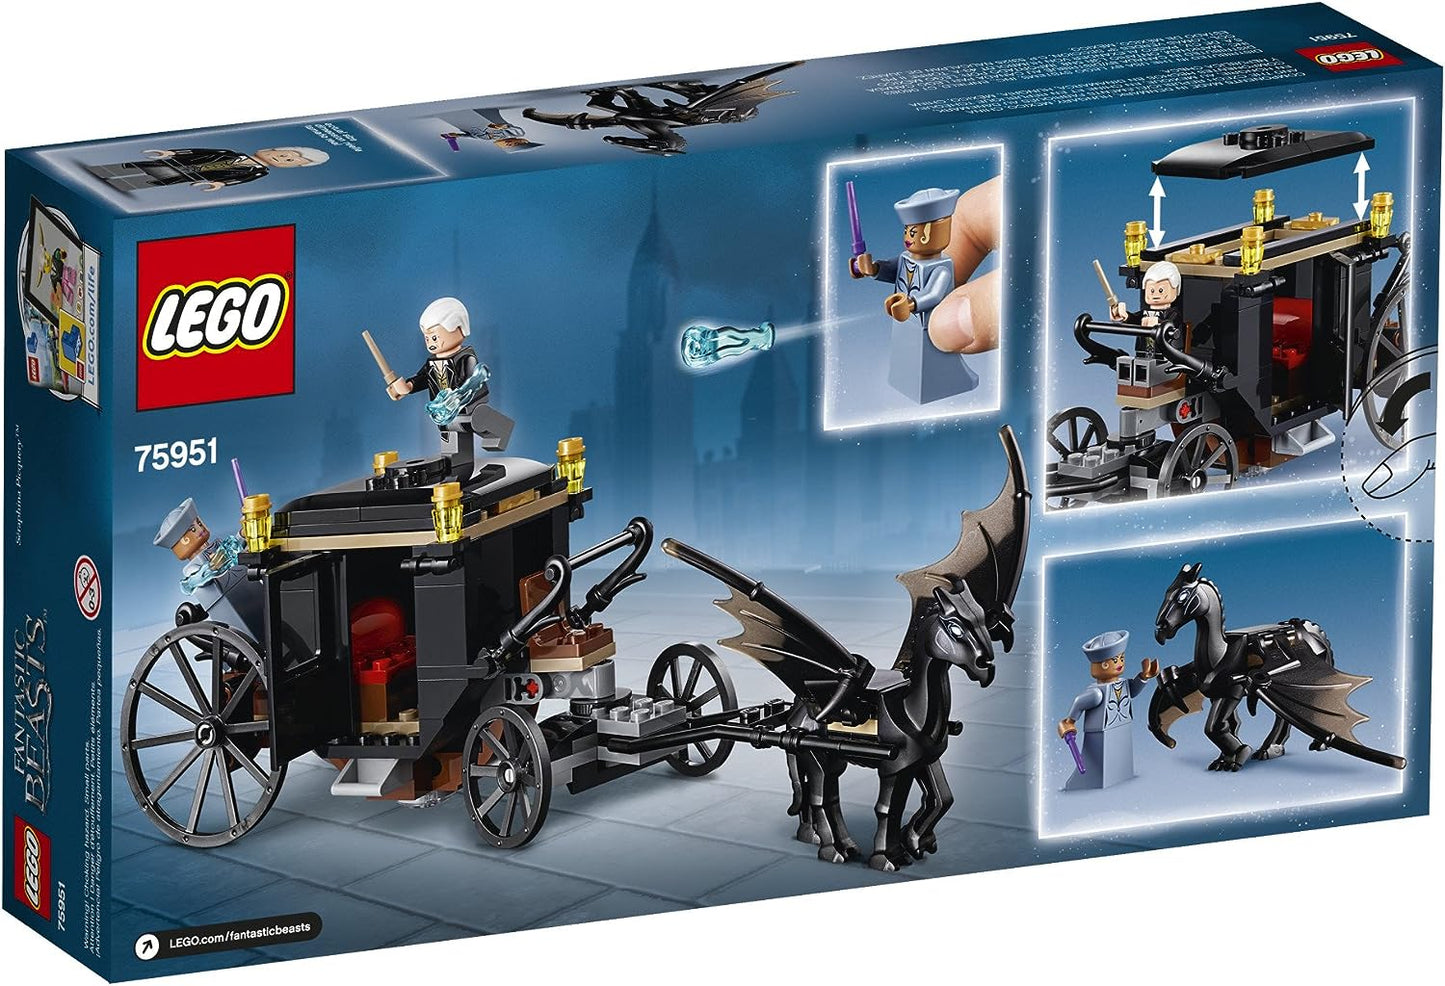 LEGO Fantastic Beasts: The Crimes of Grindelwald - Grindelwaldâ€™s Escape 75951 Building Kit (132 Pieces) (Discontinued by Manufacturer)